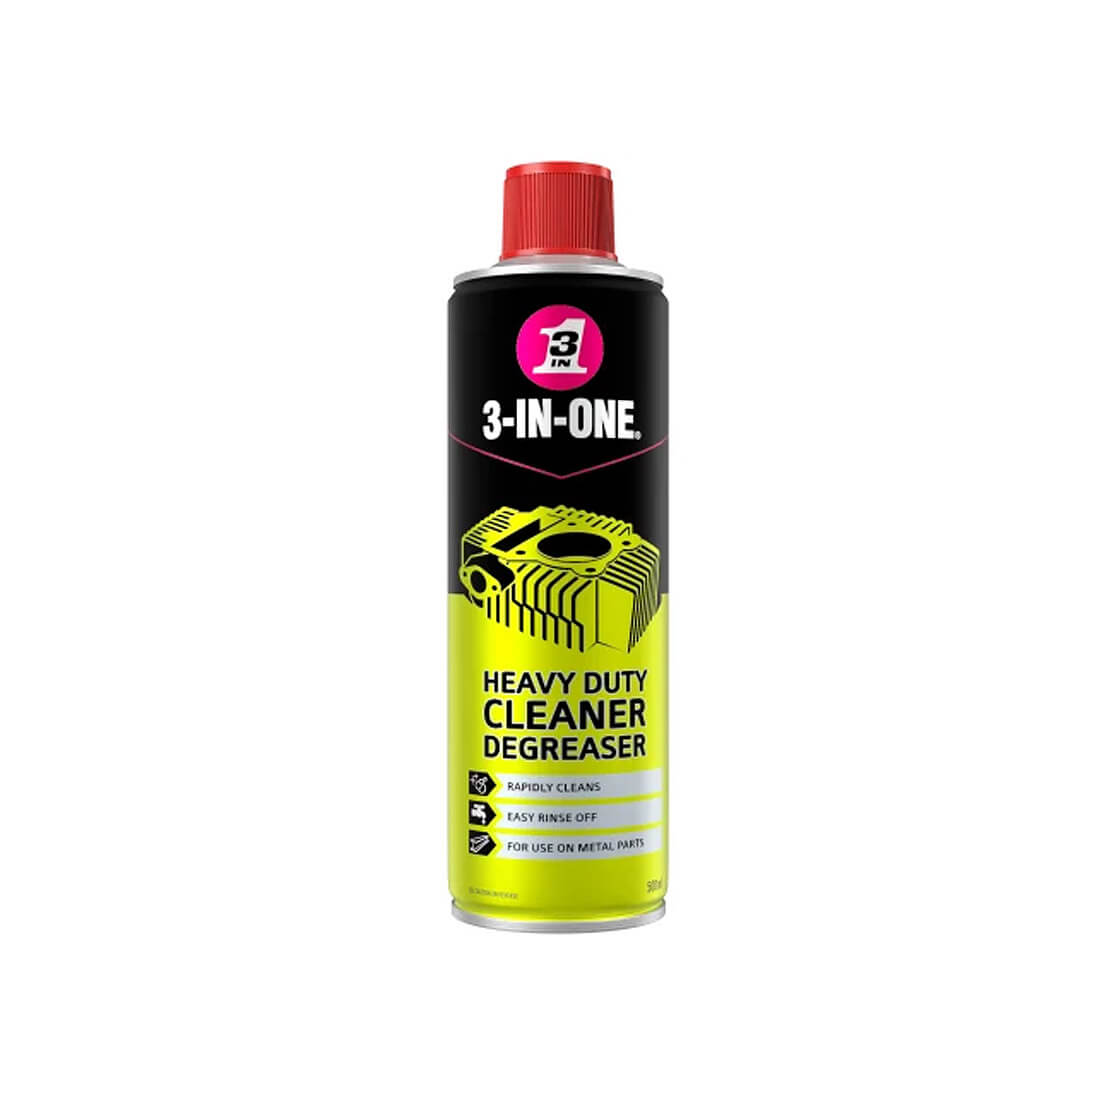 Spray can of 3-IN-ONE Heavy-Duty Cleaner Degreaser 500ml for use on metal parts. Easy rinse off.